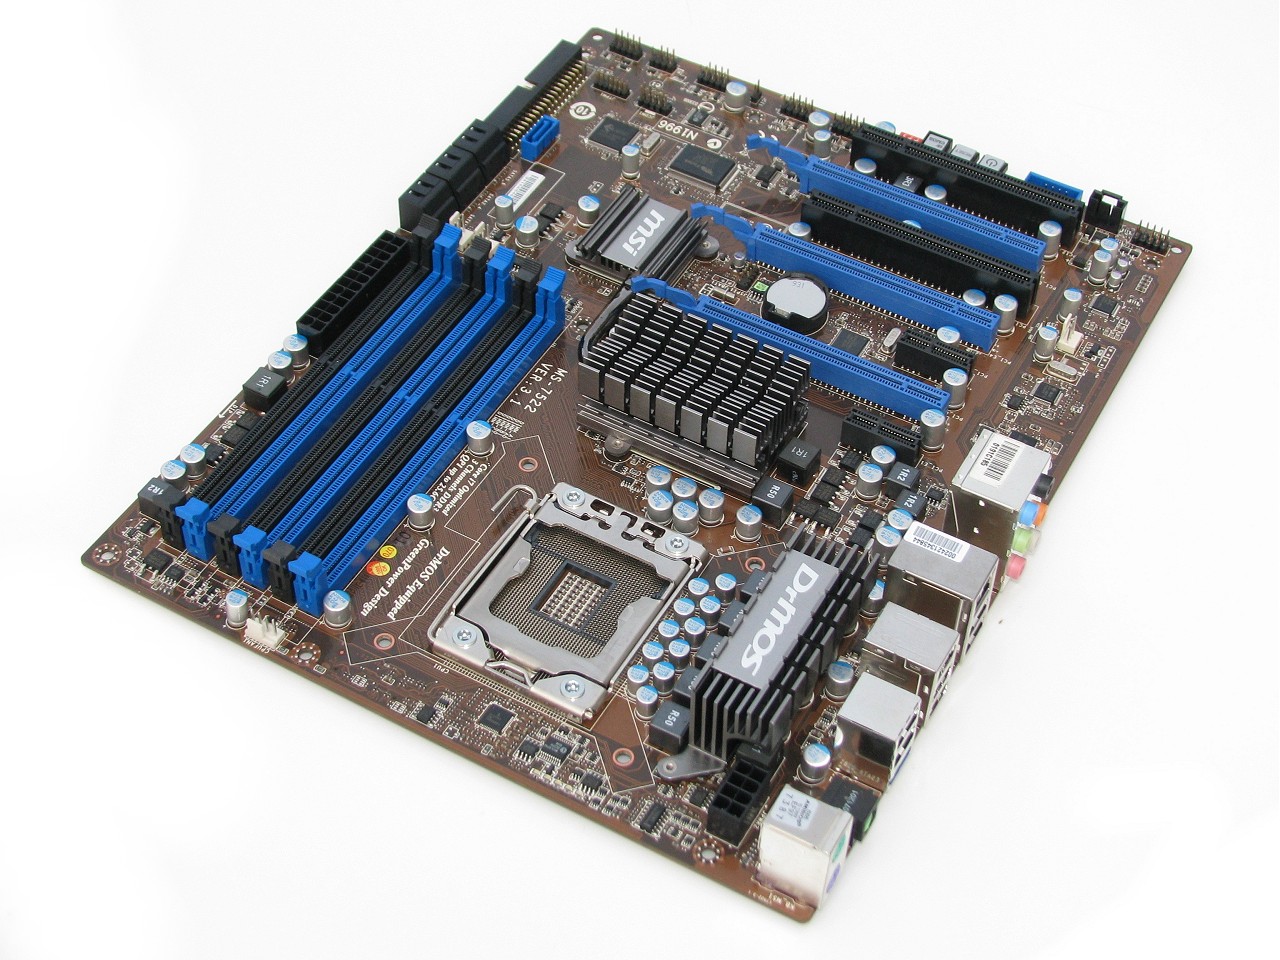 MSI X58 Pro-E motherboard review